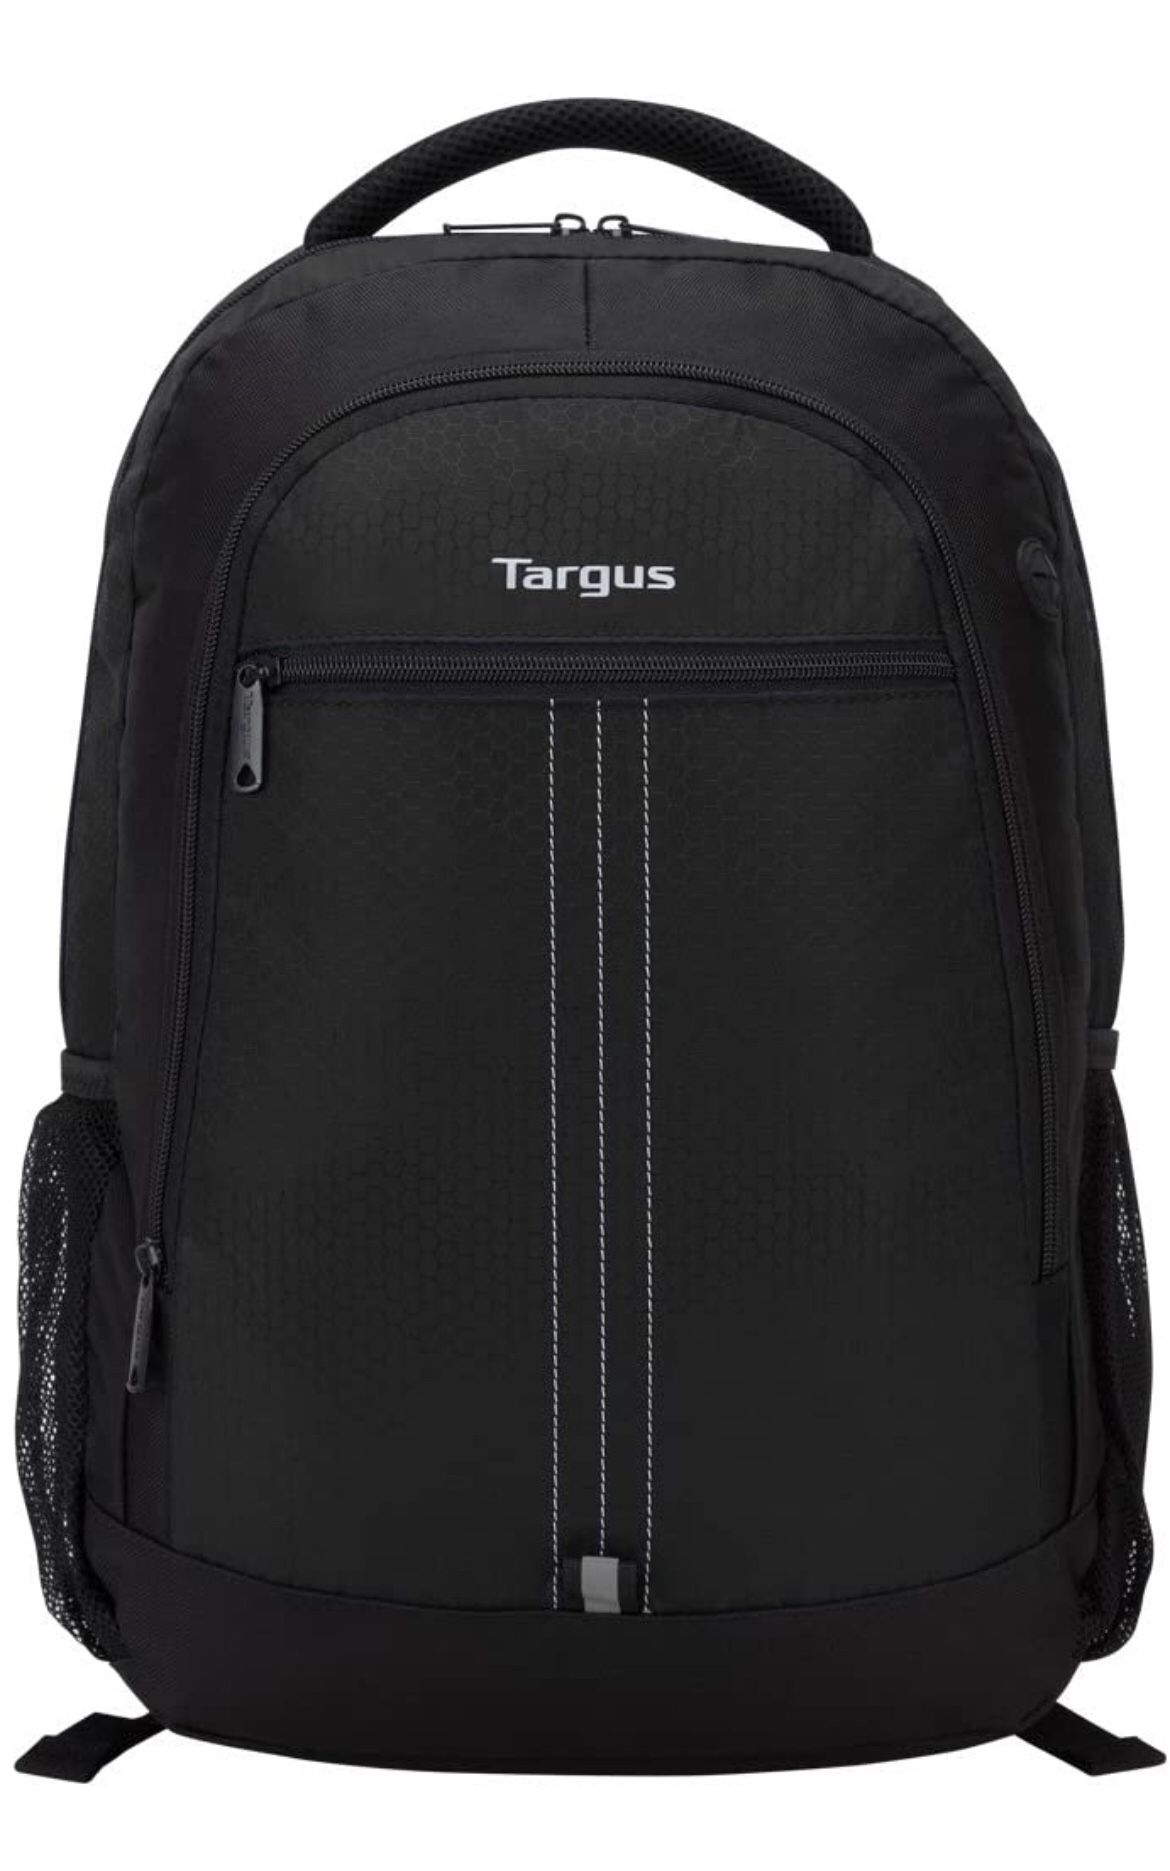 *NEW* Targus Sport Commuter Backpack with Padded Laptop 15.6-Inch Laptop. Retails $41